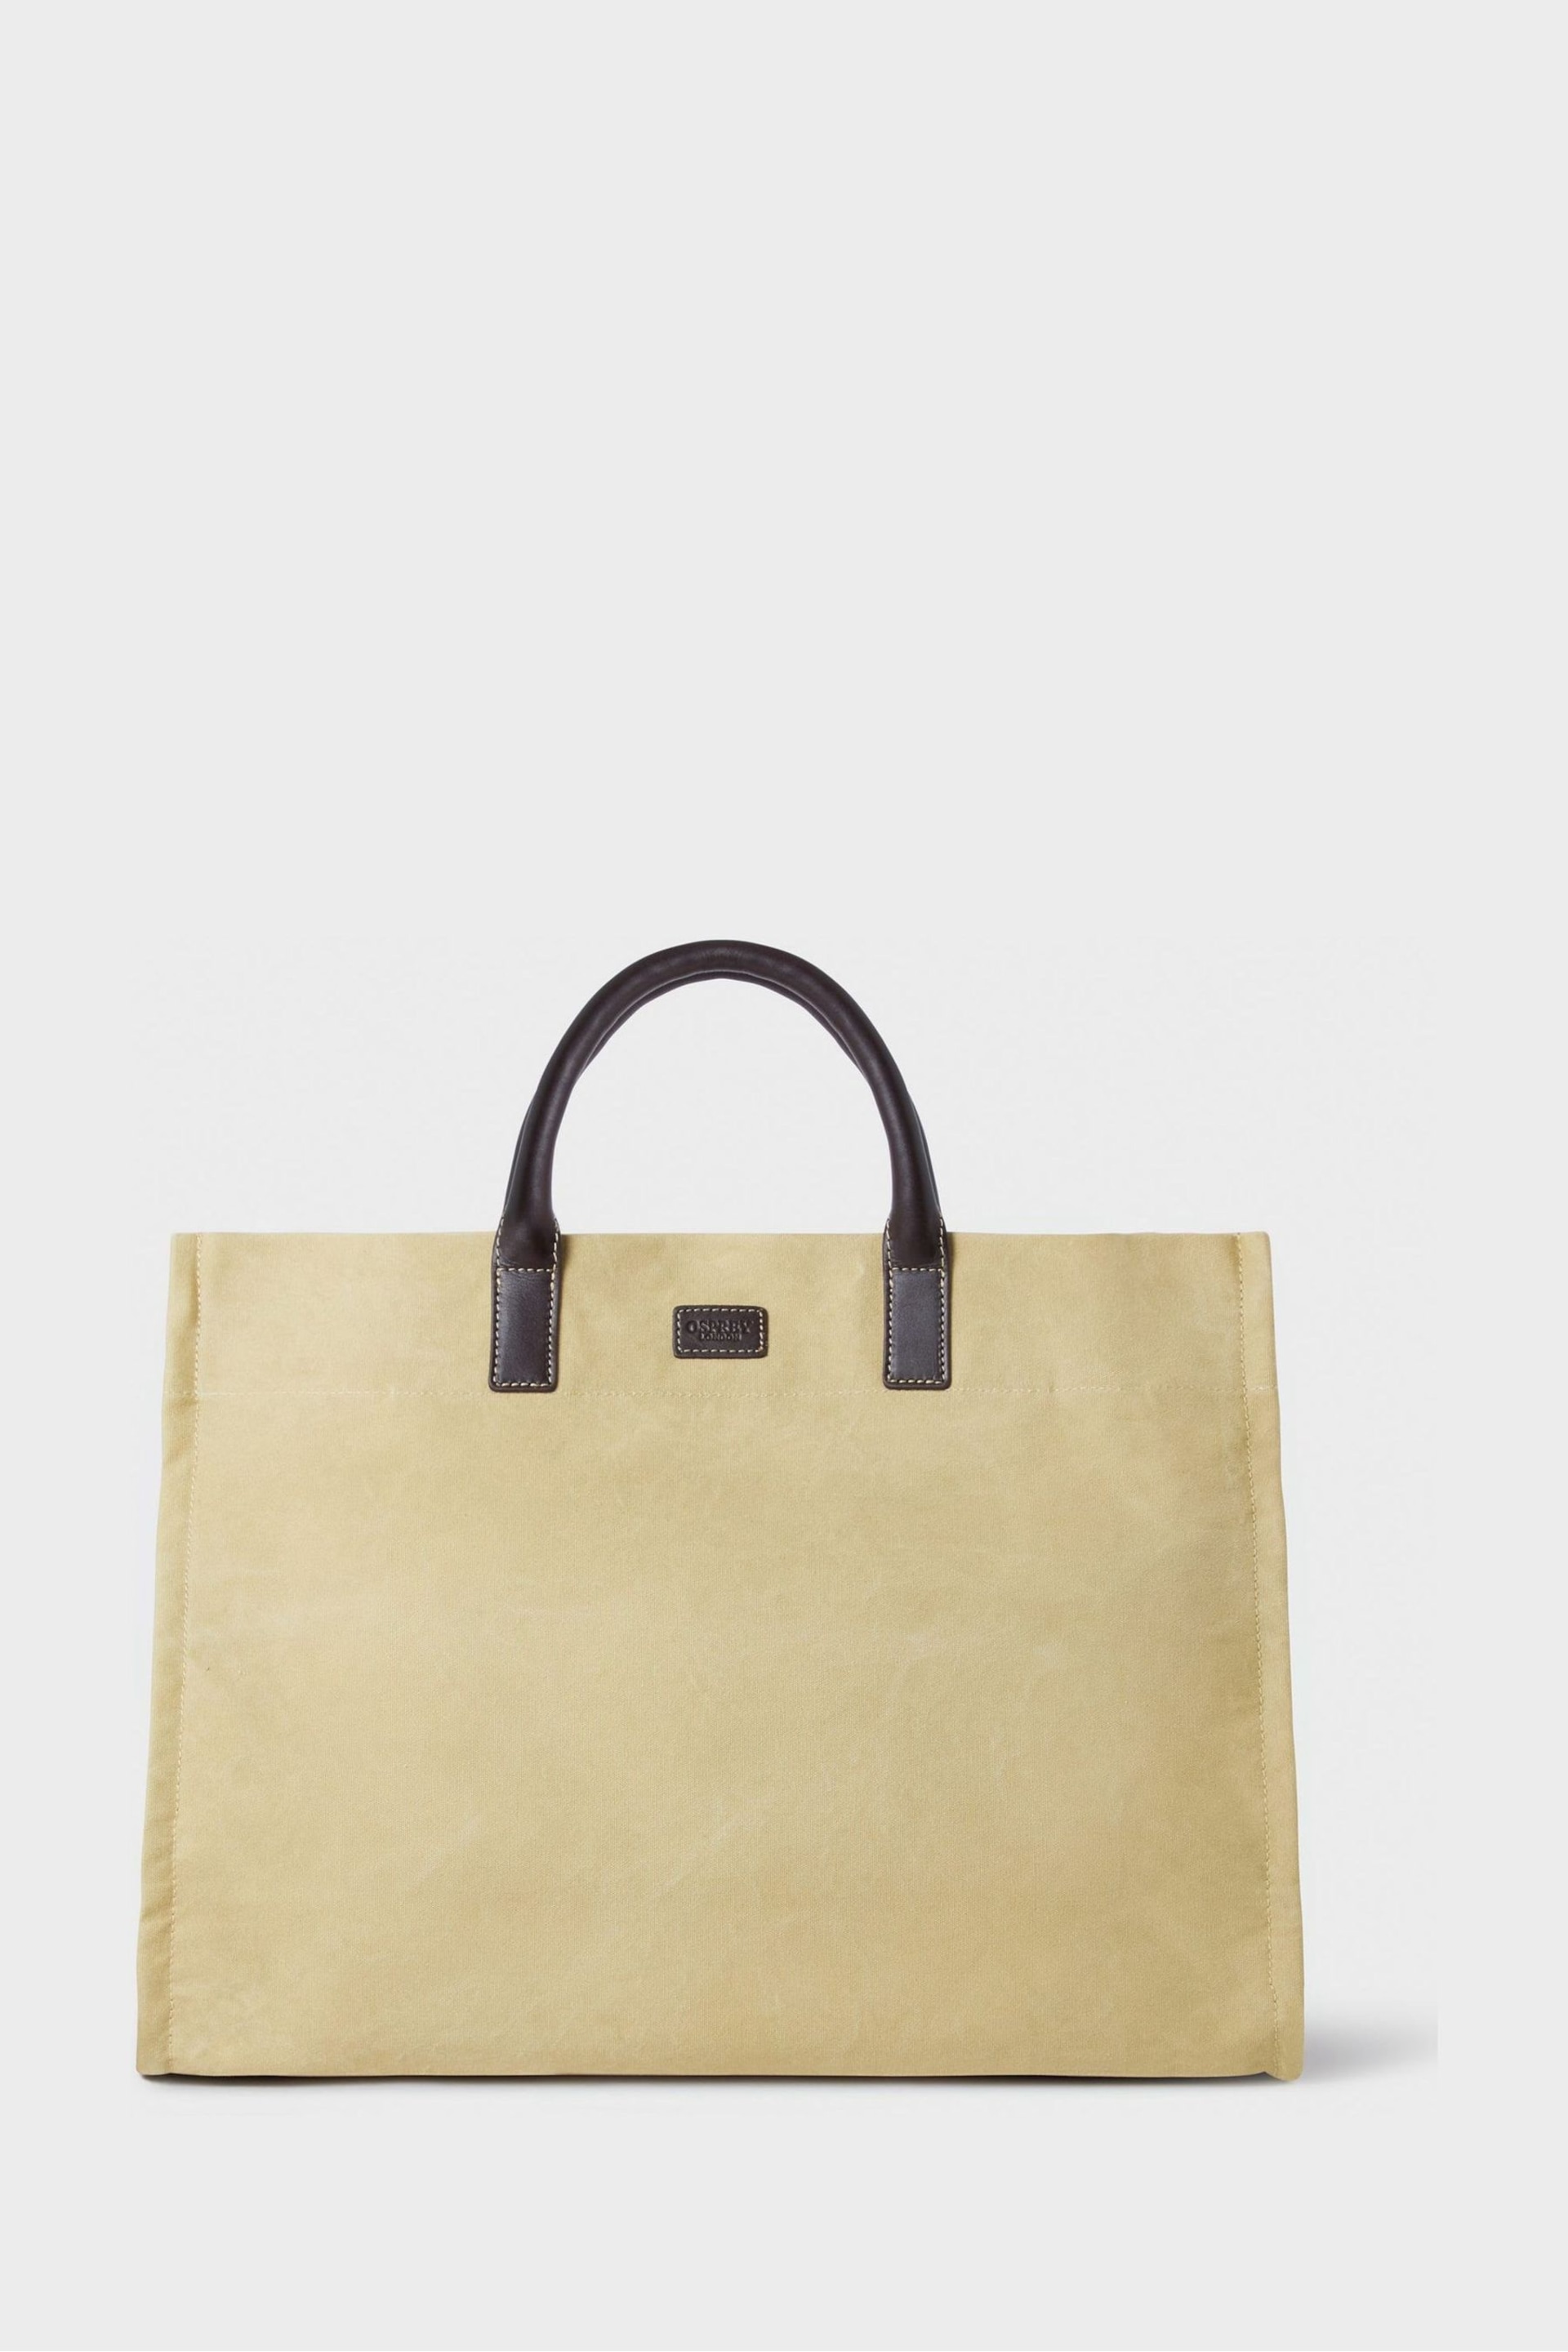 Osprey London The Mac Large Canvas Tote - Image 2 of 5